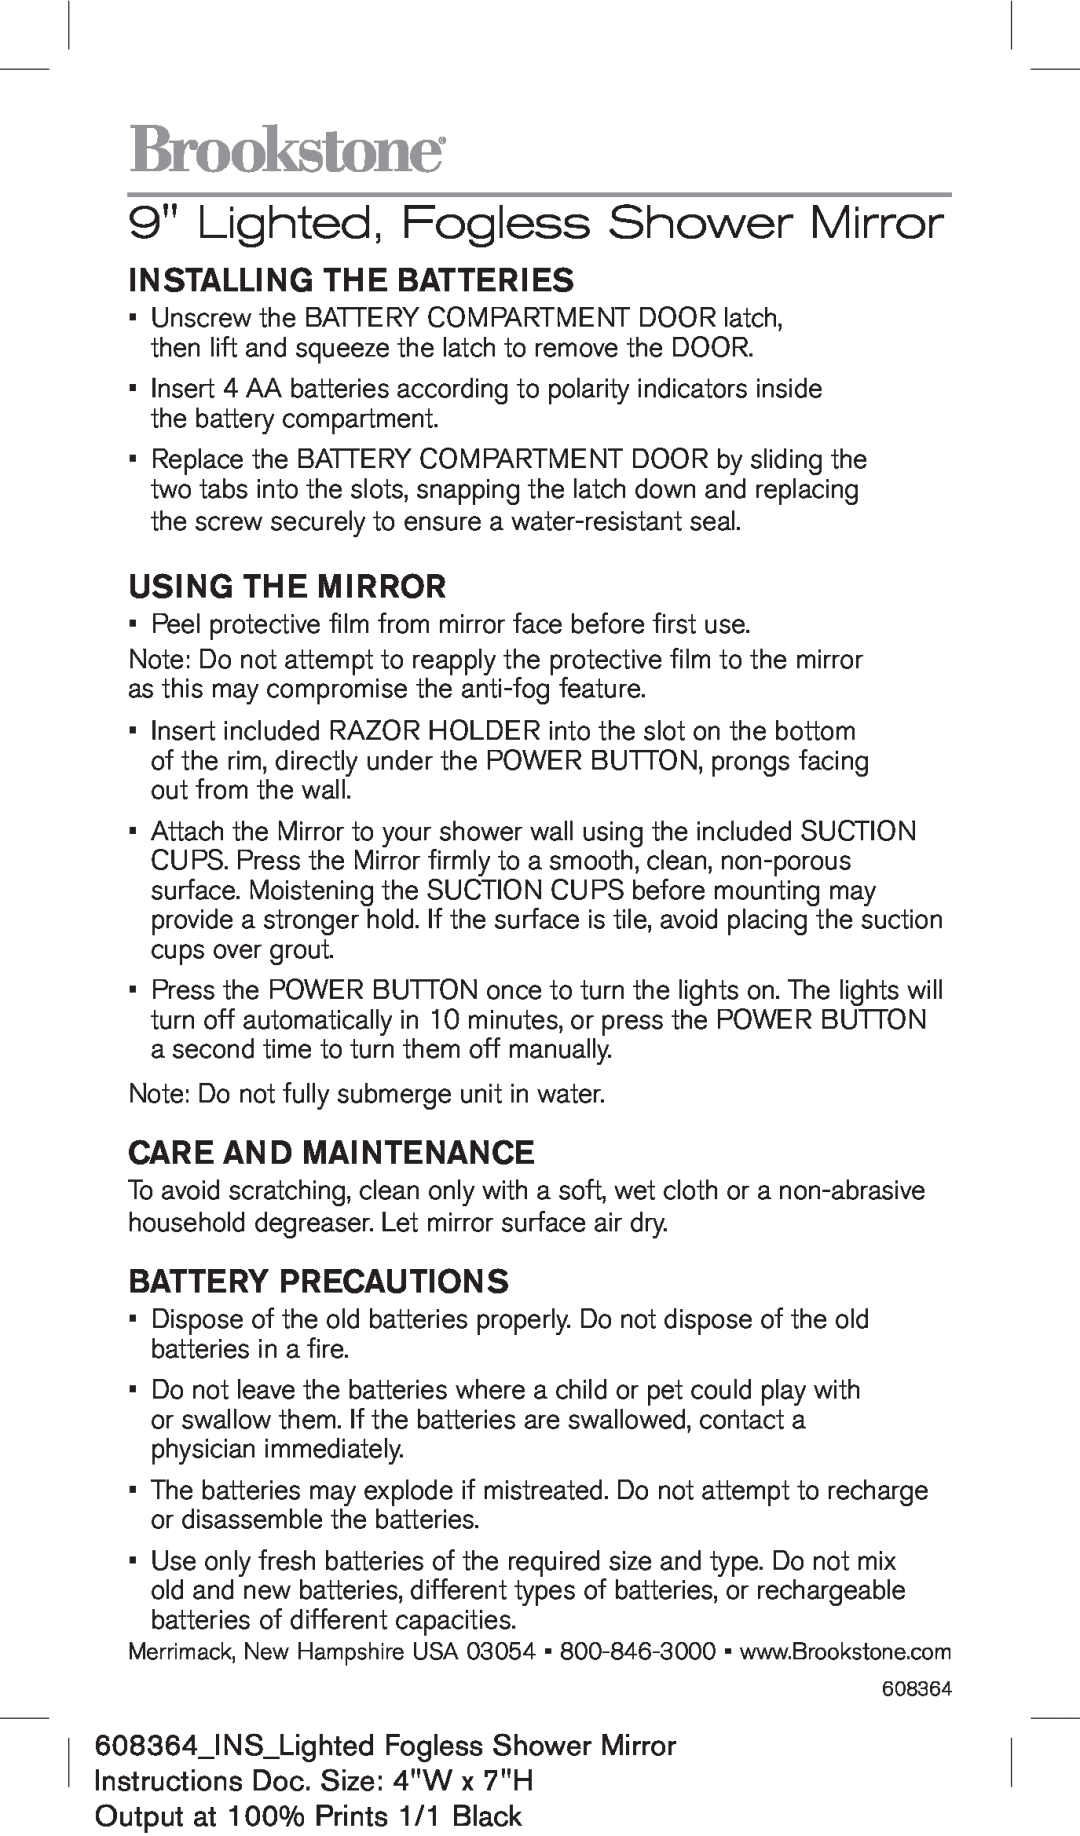 Brookstone manual 608364INSLighted Fogless Shower Mirror Instructions Doc. Size 4W x 7H, Lighted, Fogless Shower Mirror 